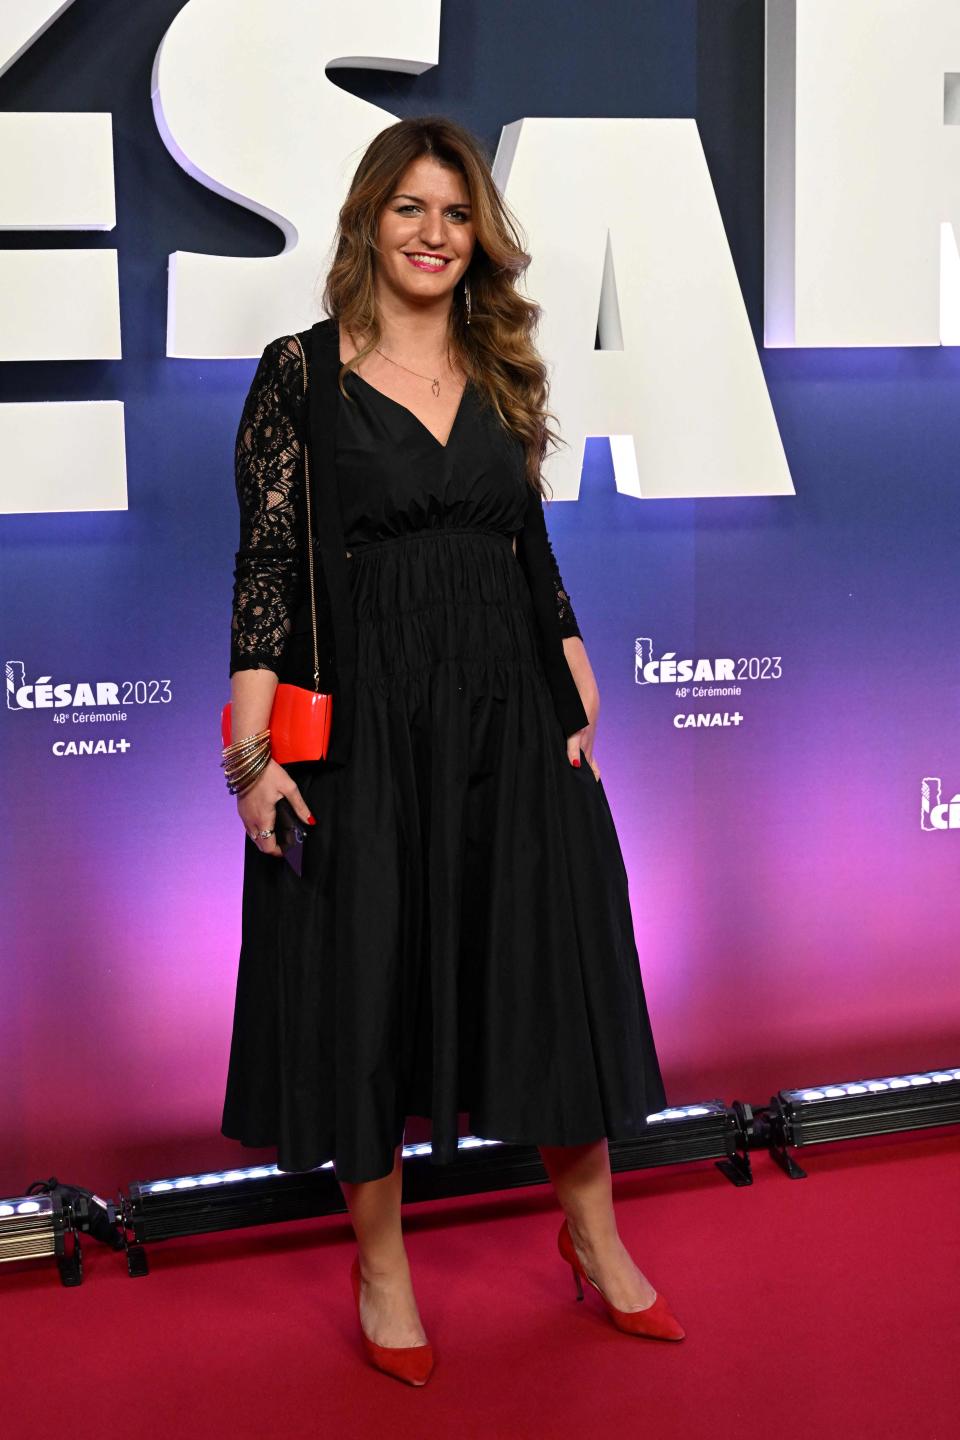 French Secretary of State for Social Economy and Associations Marlene Schiappa poses upon arrival prior to the 48th edition of the Cesar Film Awards ceremony at the Olympia venue in Paris on February 24, 2023.